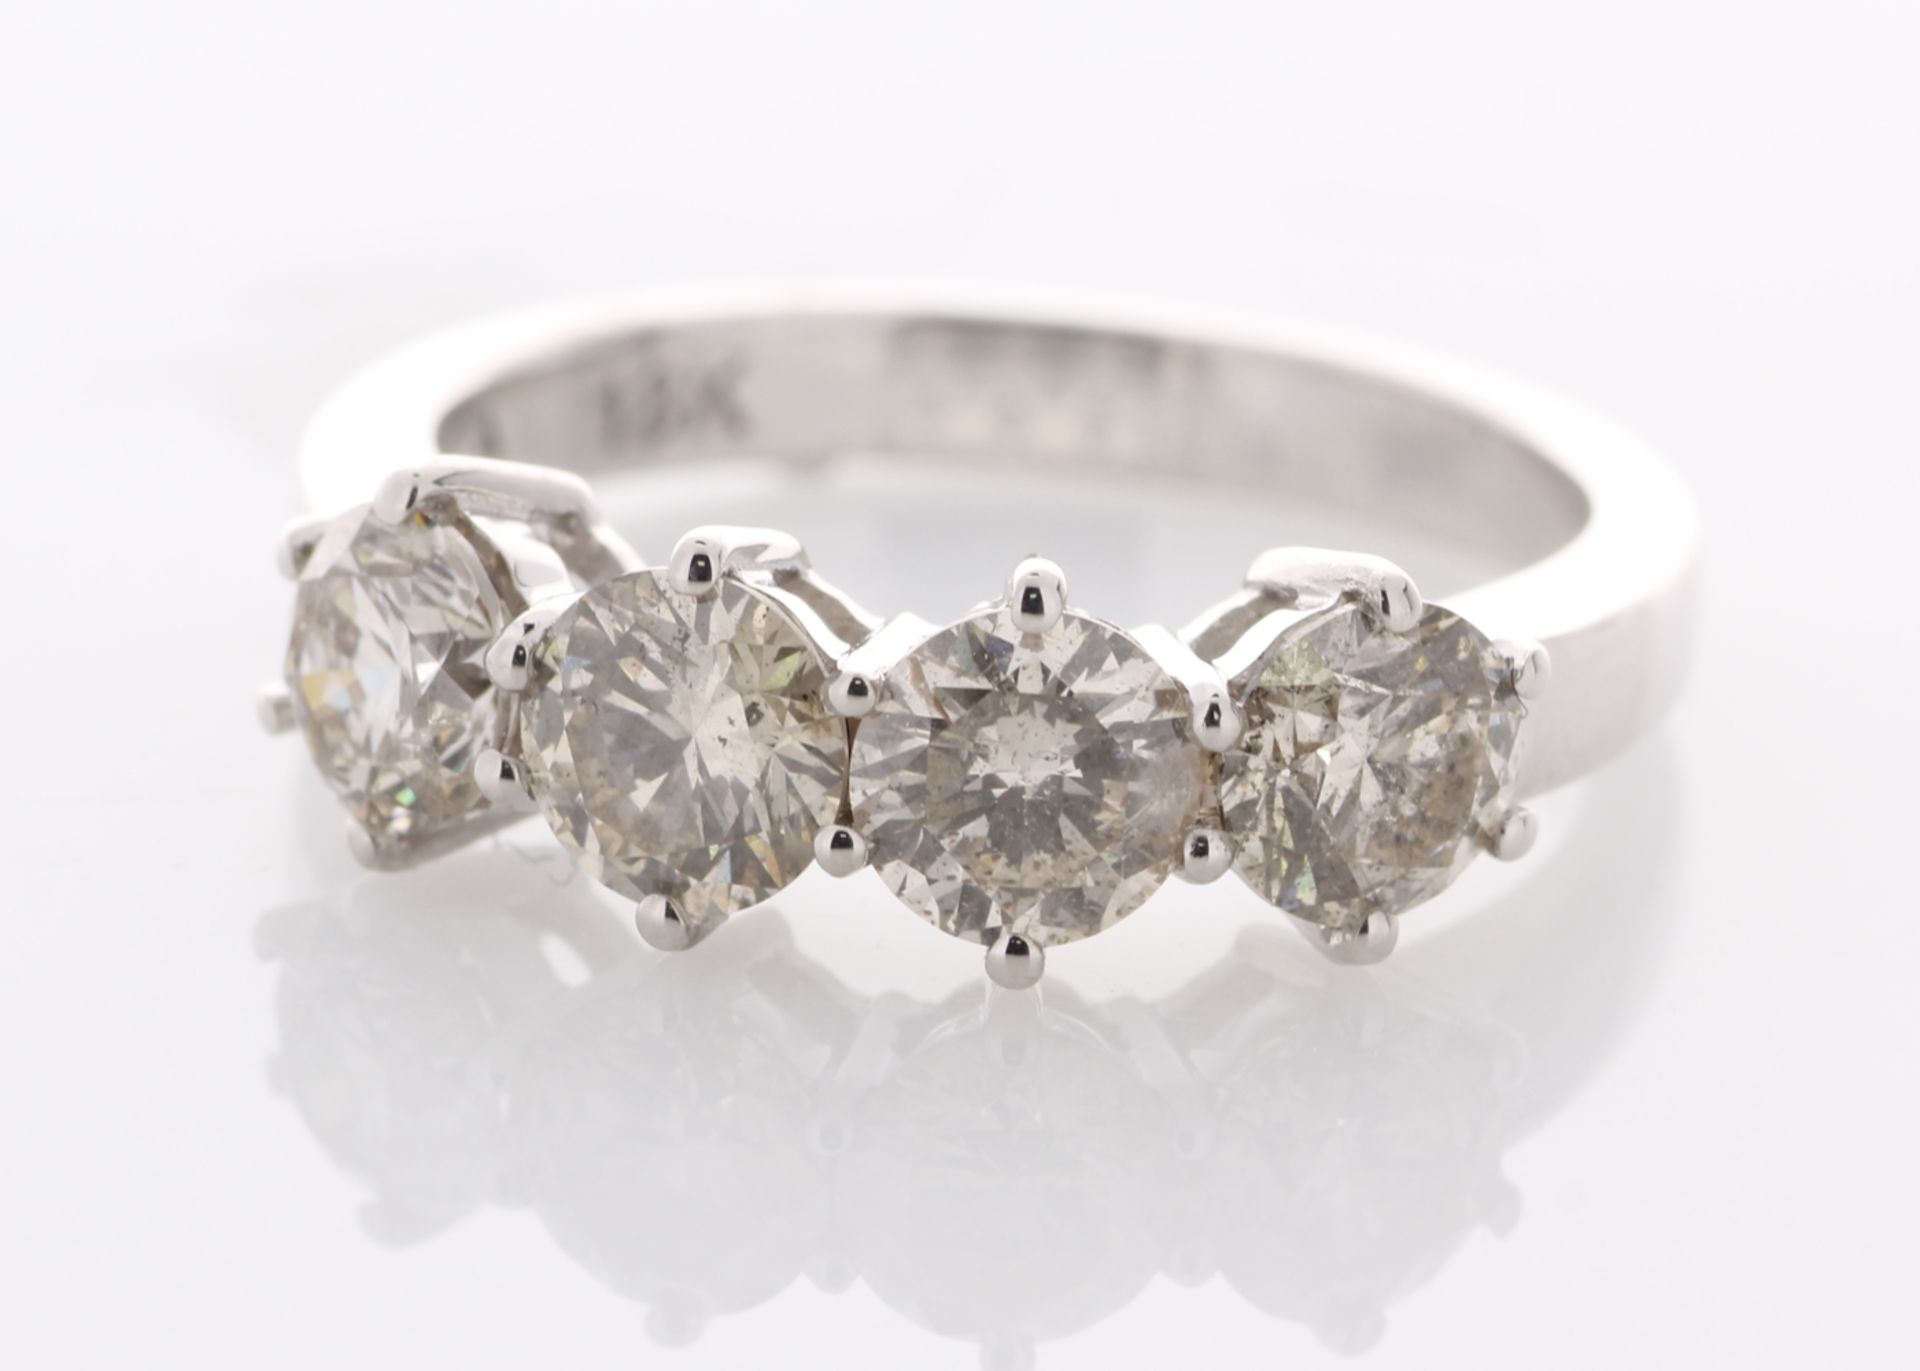 Valued by GIE £21,455.00 - 18ct White Gold Four Stone Claw Set Diamond Ring 2.10 Carats - 3145004, - Image 3 of 6